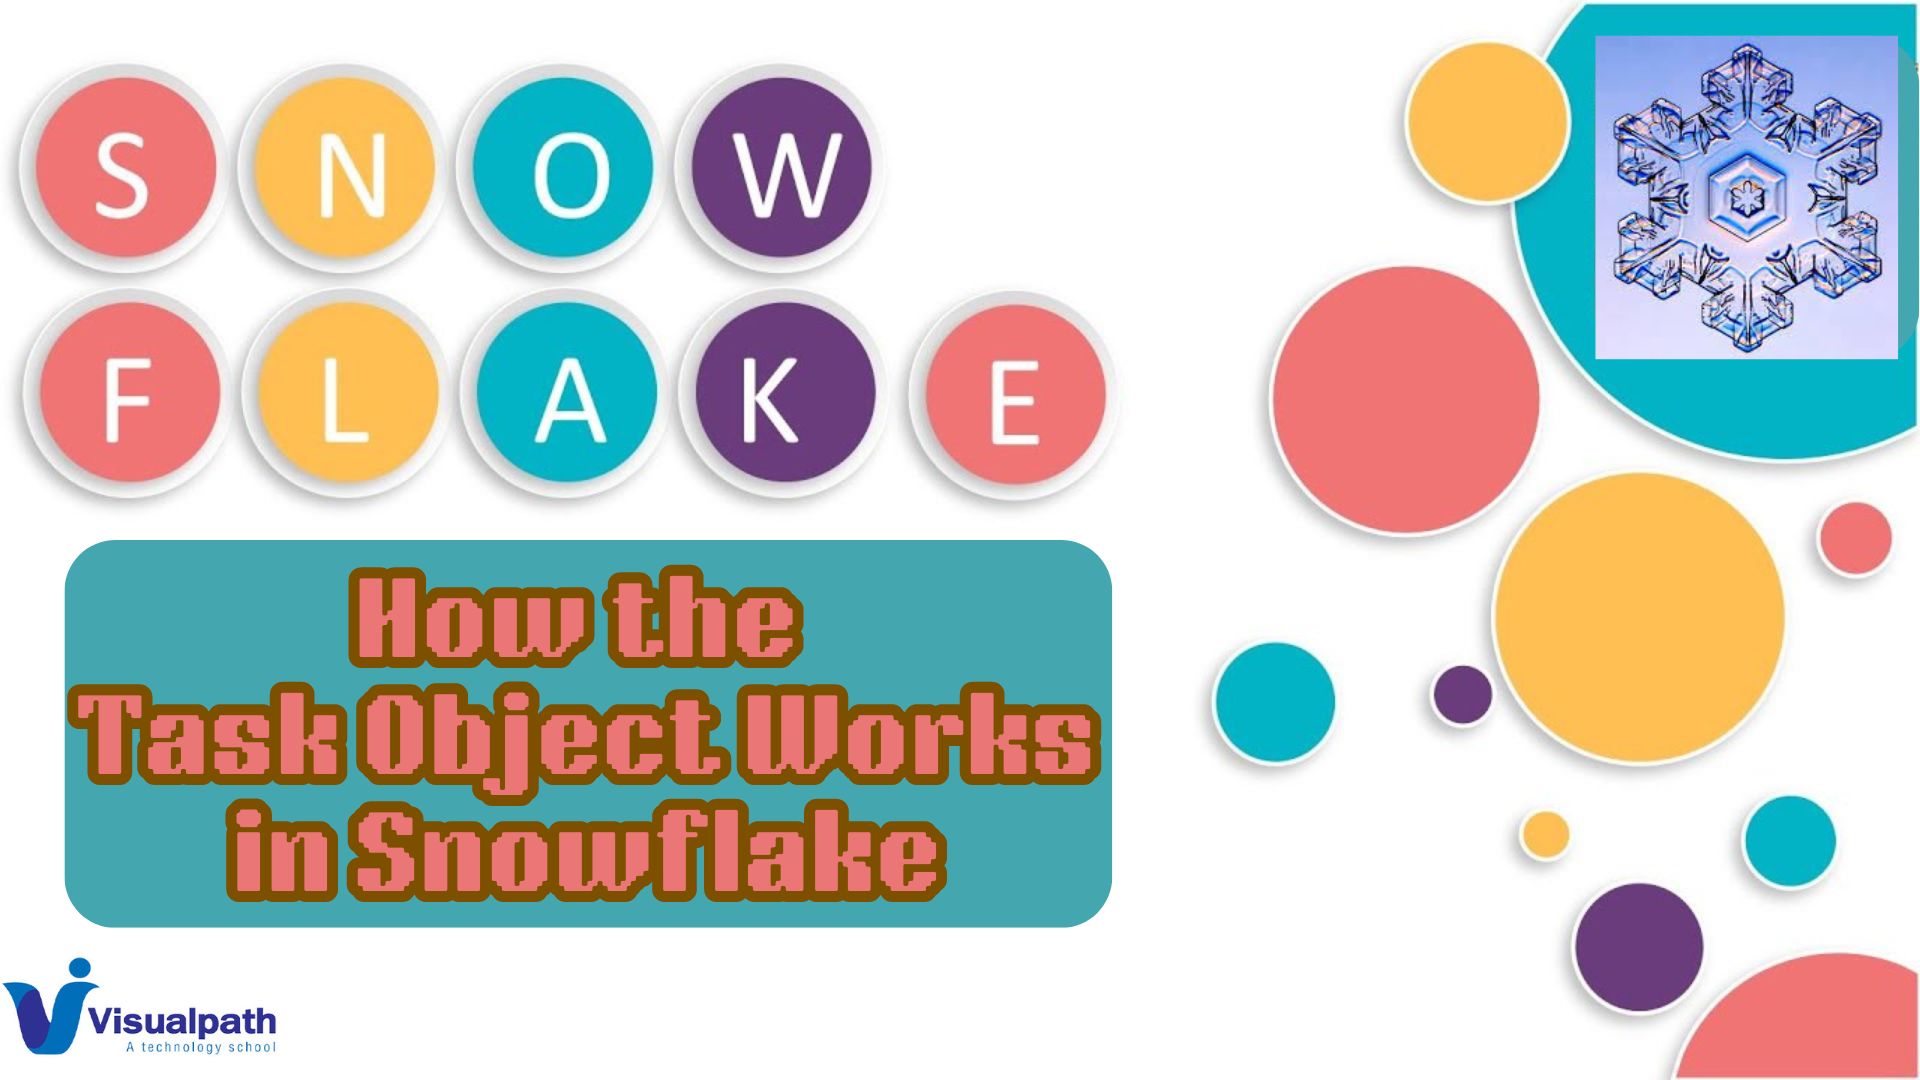 How the Task Object Works in Snowflake